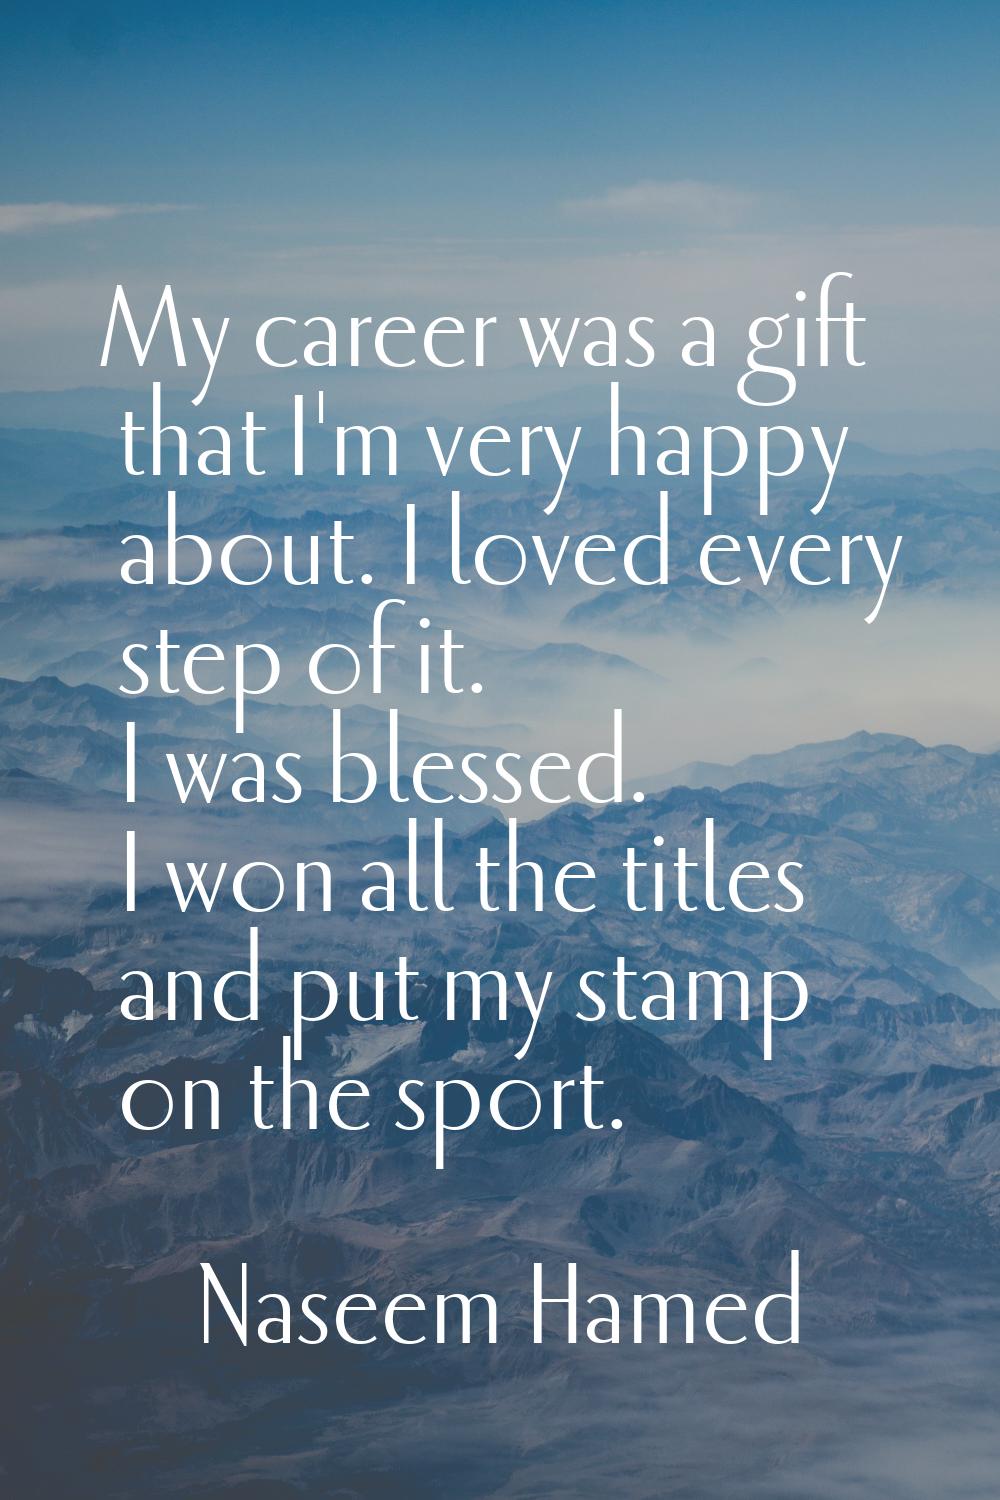 My career was a gift that I'm very happy about. I loved every step of it. I was blessed. I won all 